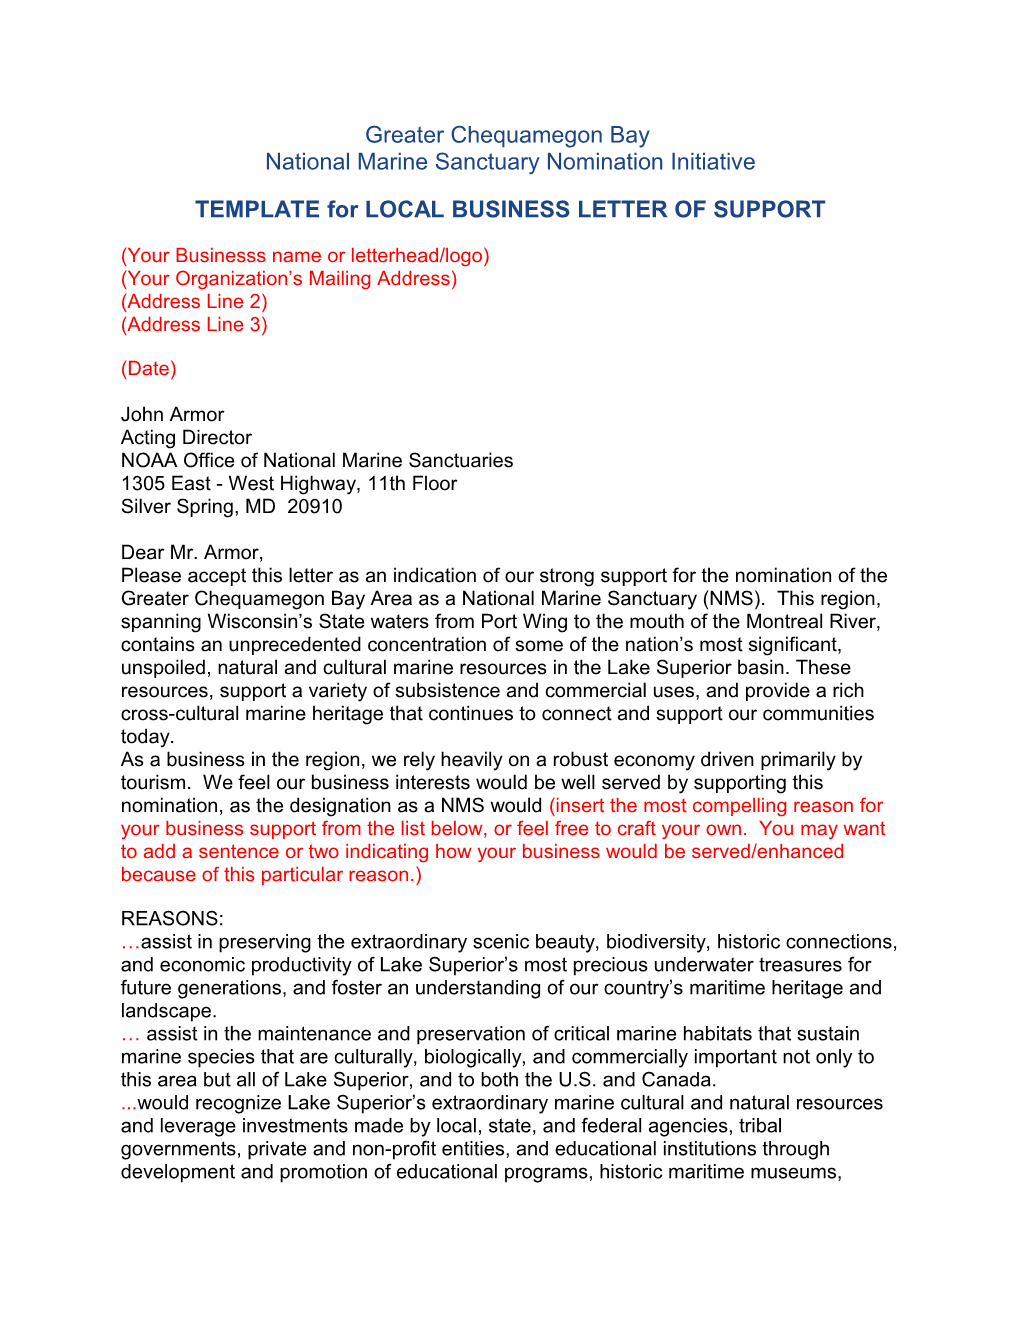 TEMPLATE for LOCAL BUSINESS LETTER of SUPPORT